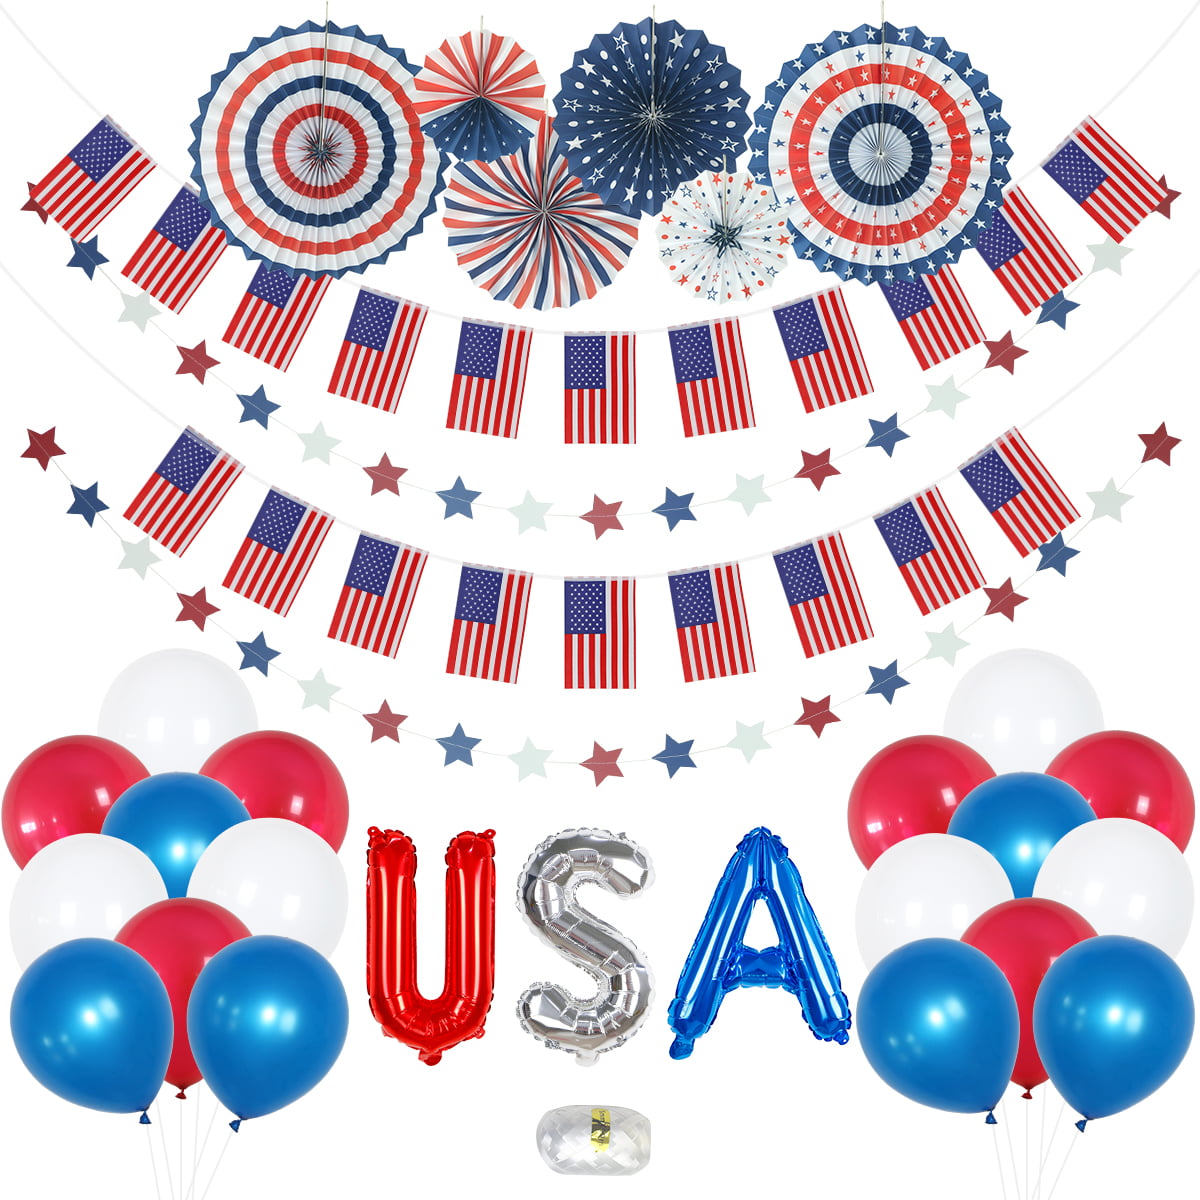 Patriotic Party Favor Indoor/Outdoor Decoration Veterans Day Swirl Streamer,Balloon,Cupcake Topper for 4th of July Memorial Day Independence Day 54 Pcs Patriotic Party Supplies of Banner 